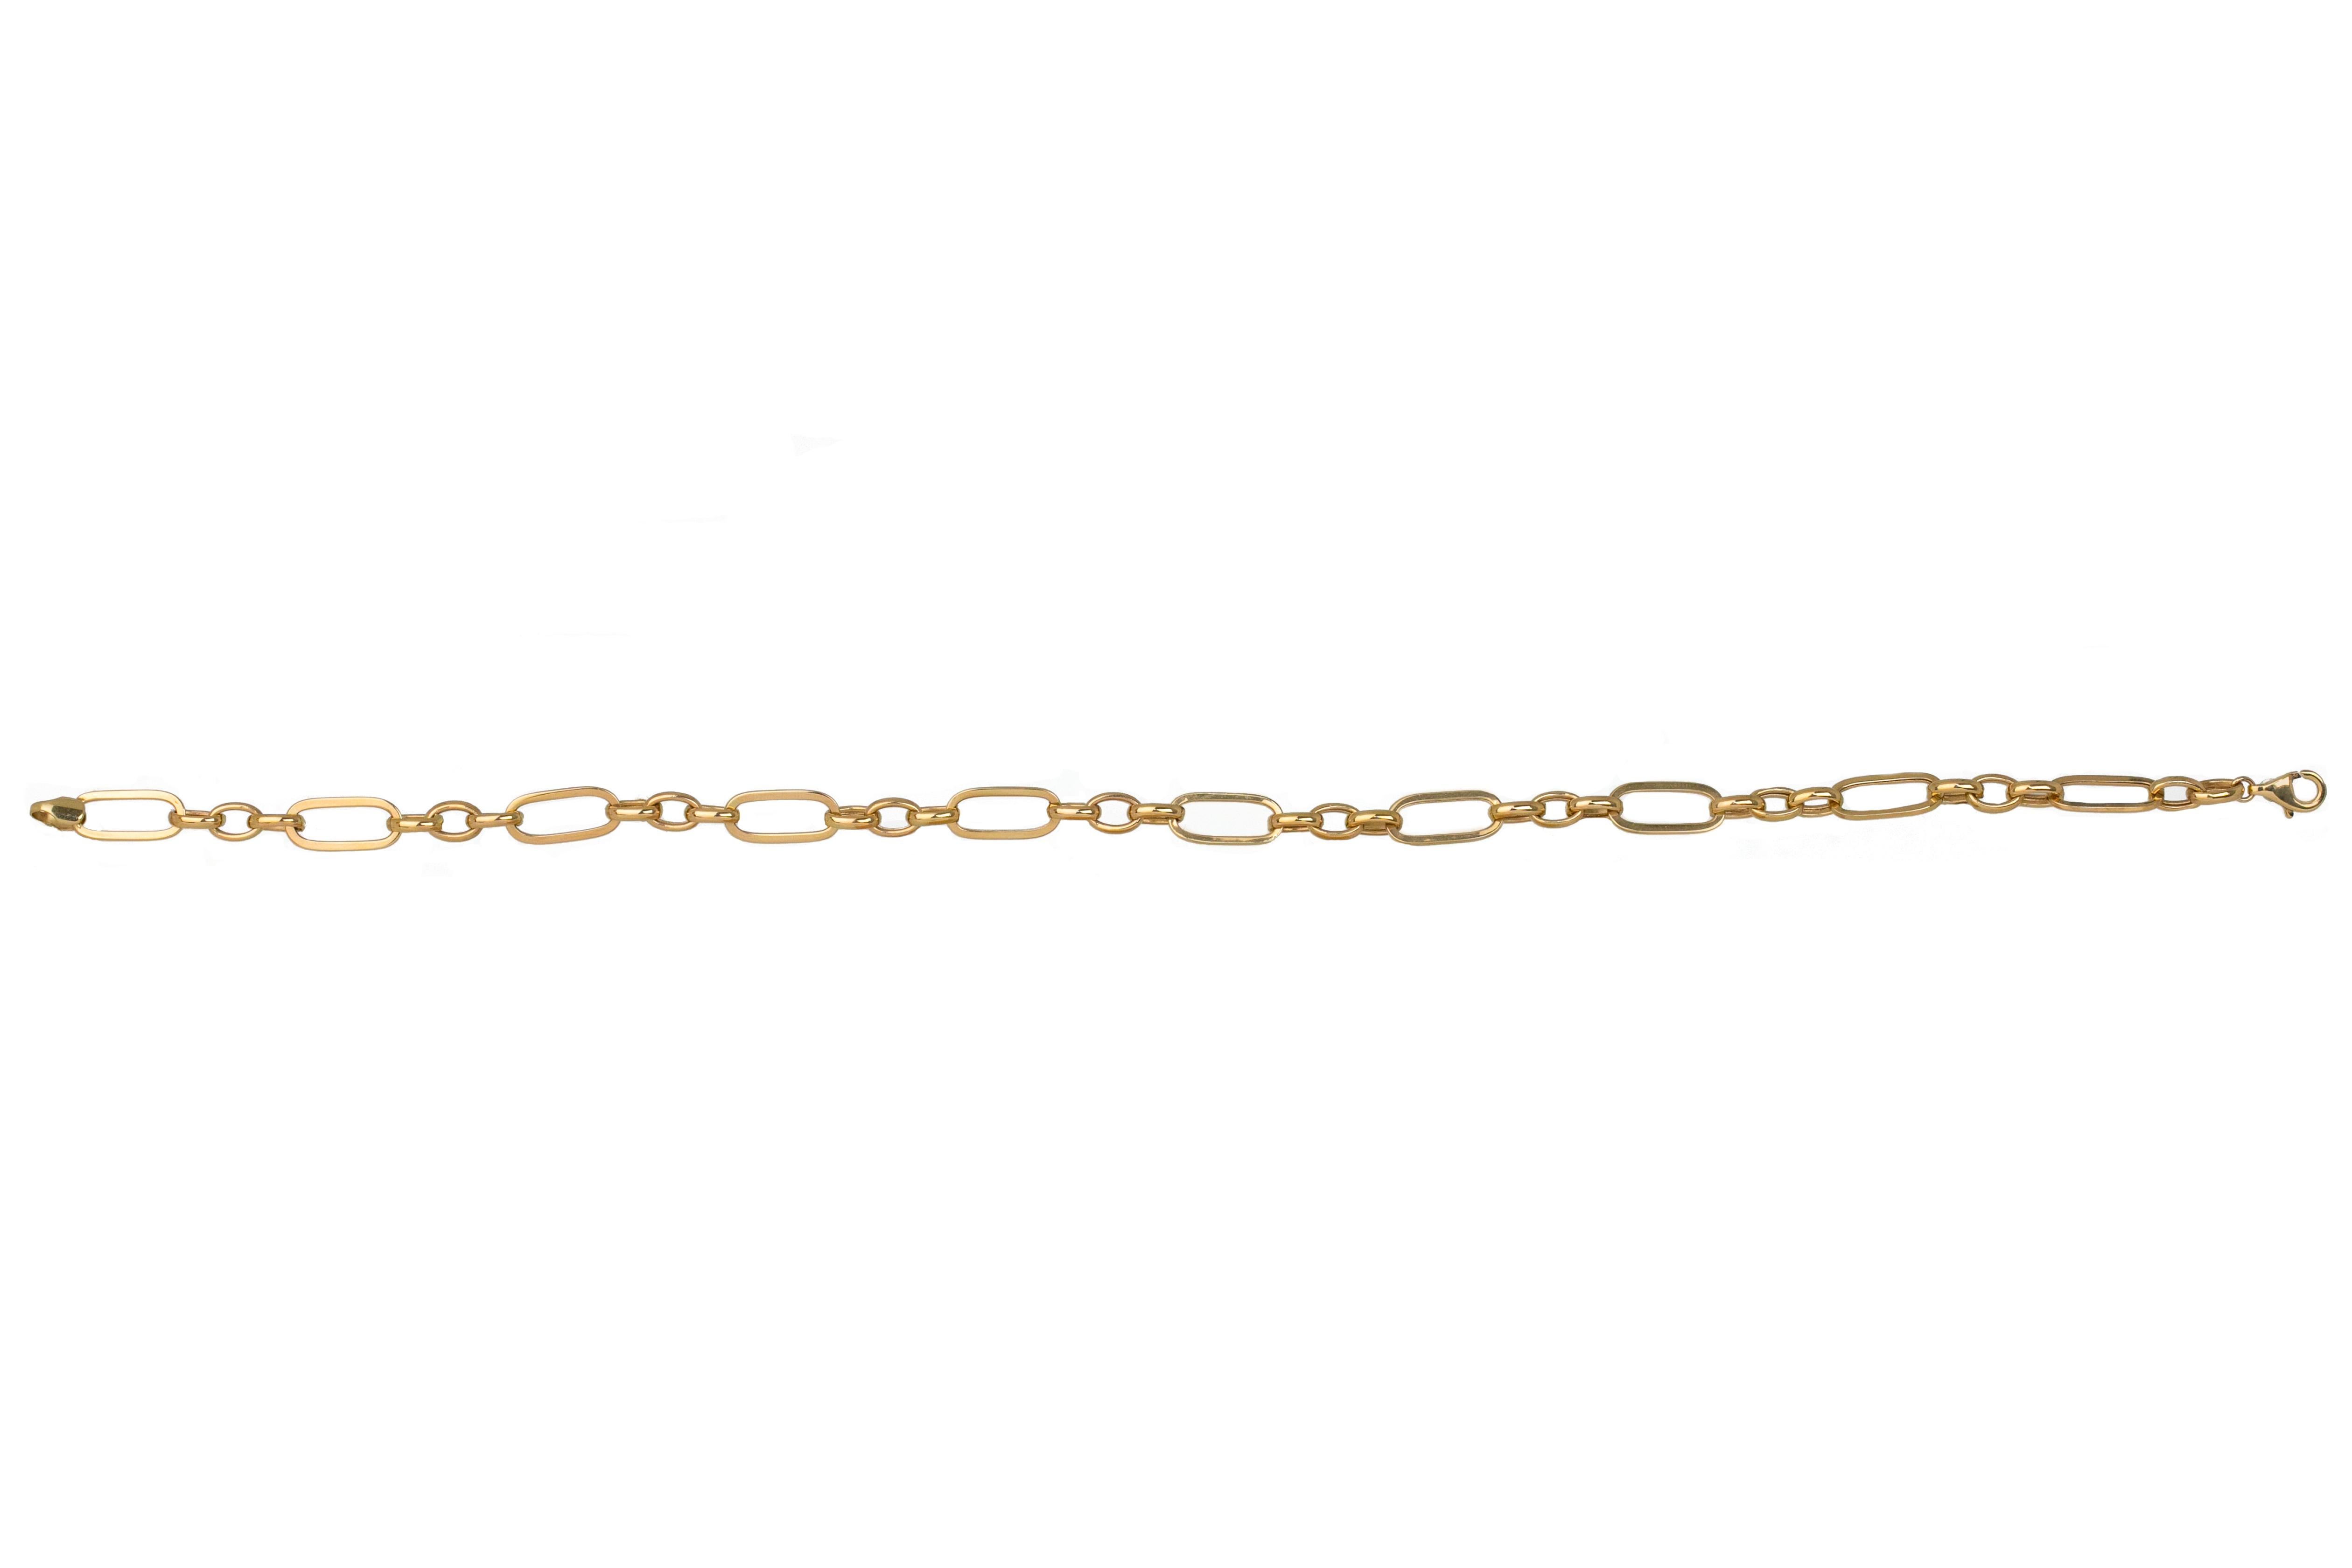 14K Gold Bangle Paper Clip Chain Bracelet

Solid gold.
With hallmark.

Total Weight: 4.26 gr.
Size: 27.50 cm

*This chain is called 3+1 Paper Clip Chain. It consists of 3 small models + 1 large model.

This piece was made with quality materials and